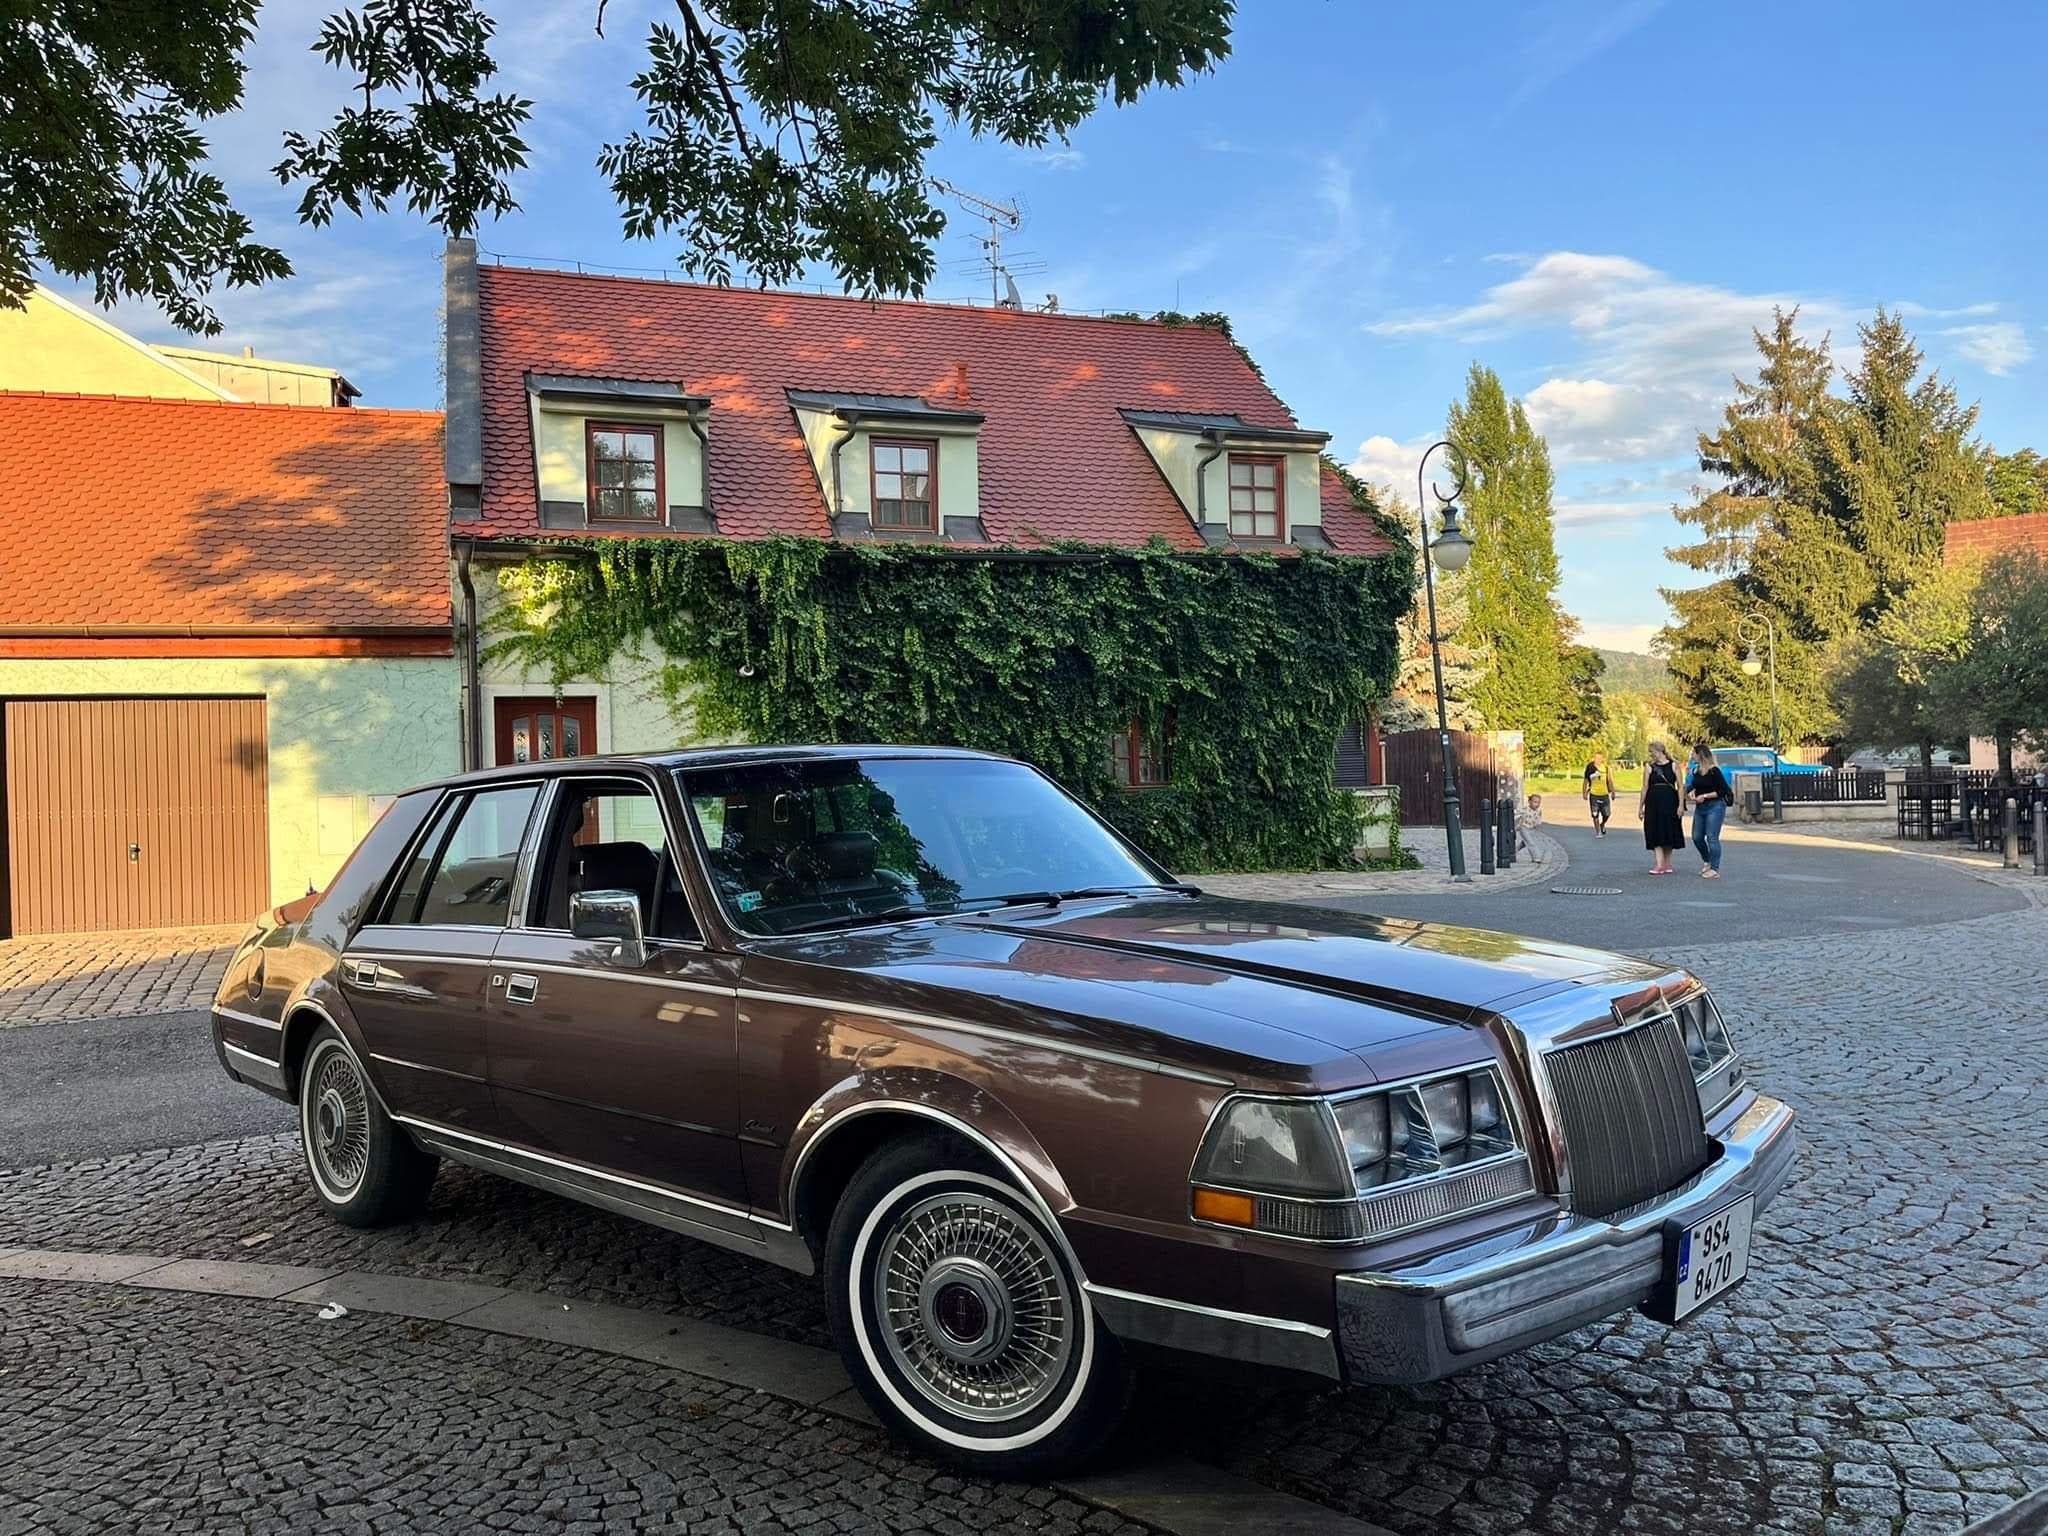 Is an ’87 Lincoln the ideal ride for Central Europe?